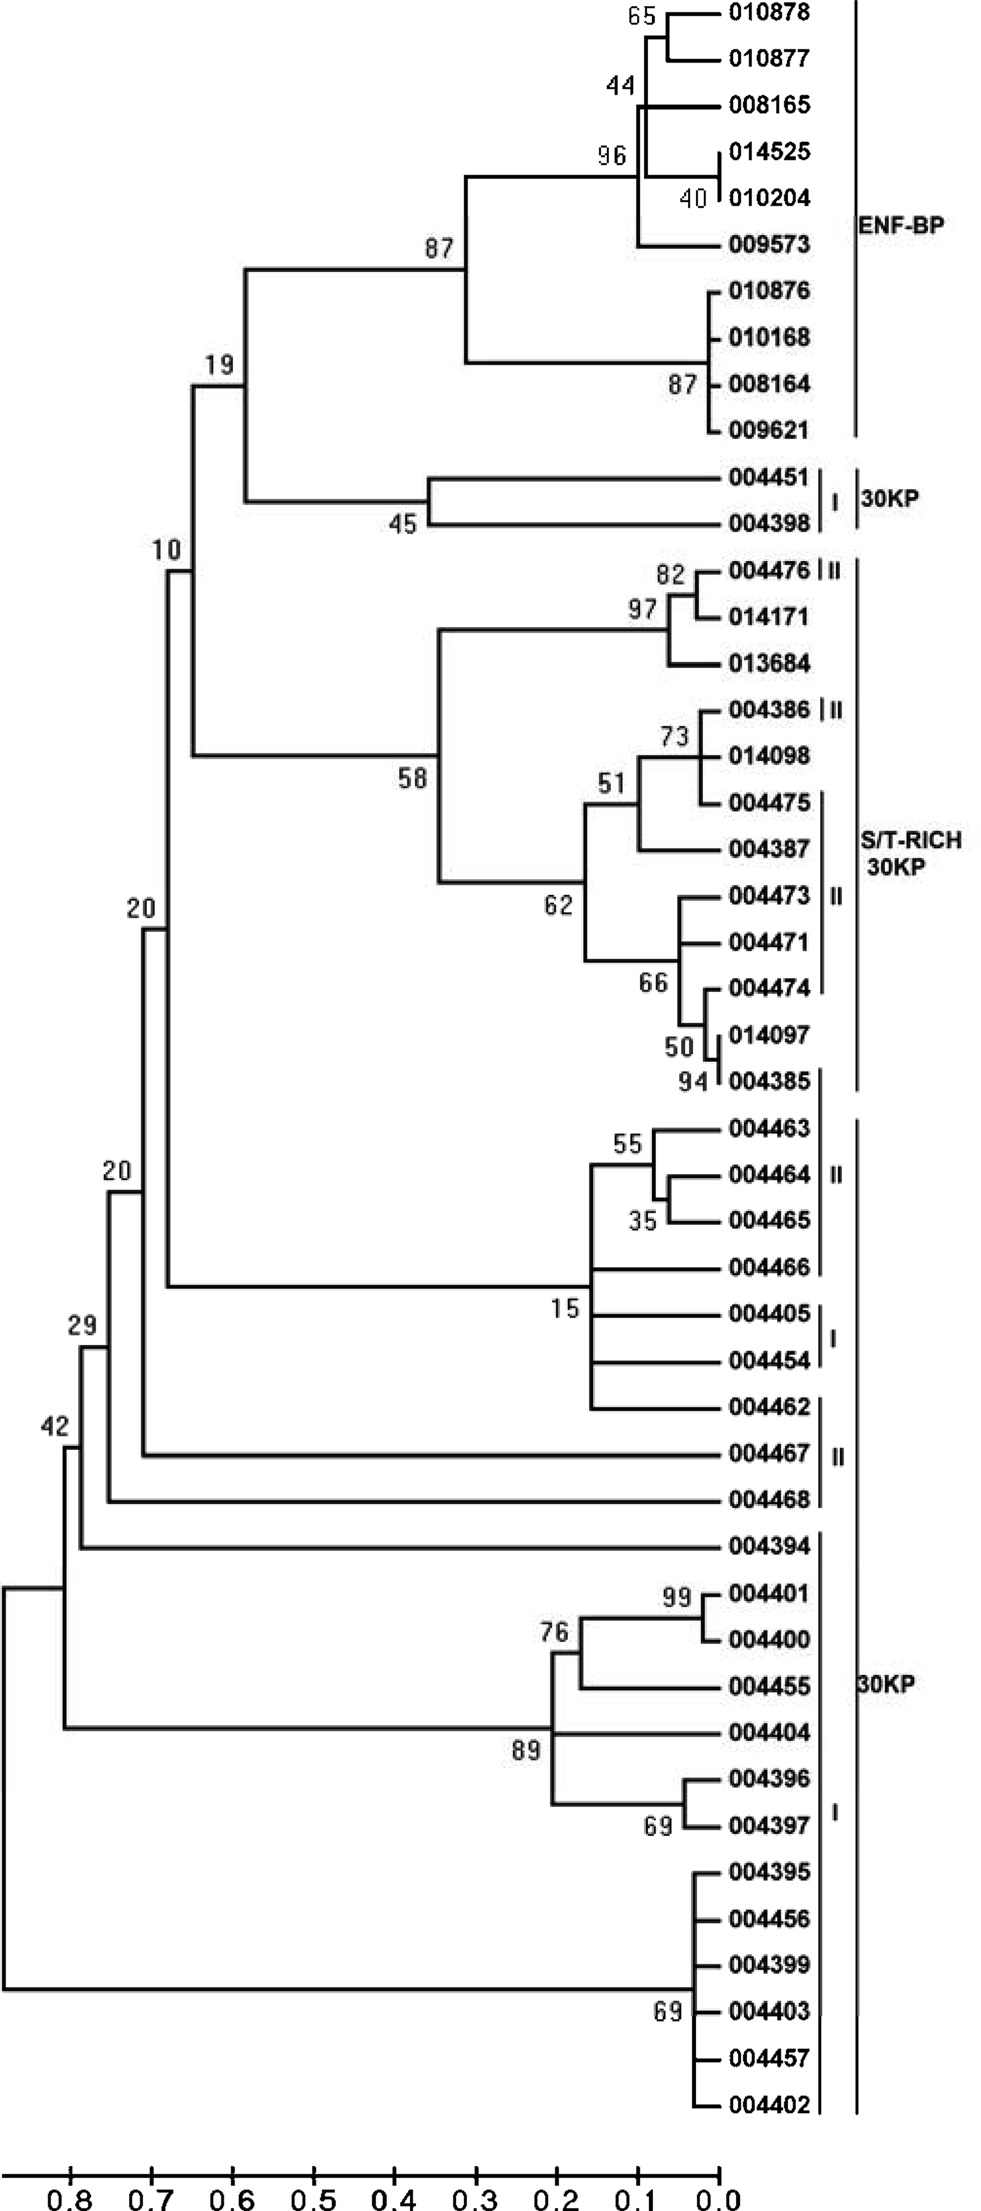 Neighbor-joining tree of paralogous genes of paralytic peptide binding protein, percentage of bootstrap values (based on the 1000 replication) for the main branching nodes are shown on the tree. The paralogous gene sequences retrieved from silkworm genome database are indicated by Gene ID number.